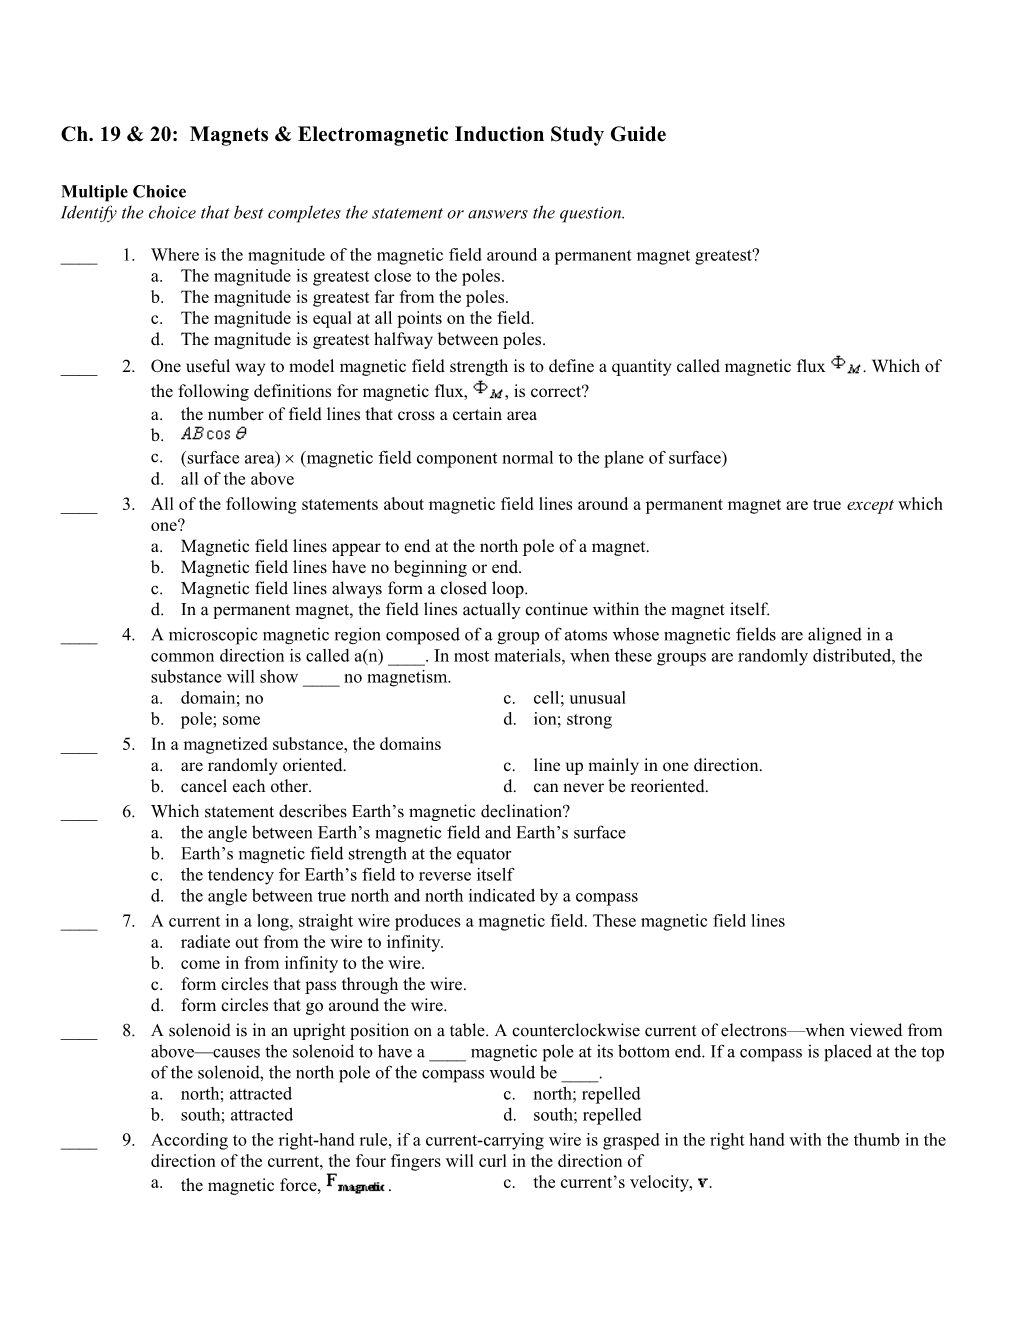 Ch. 19 & 20: Magnets & Electromagnetic Induction Study Guide